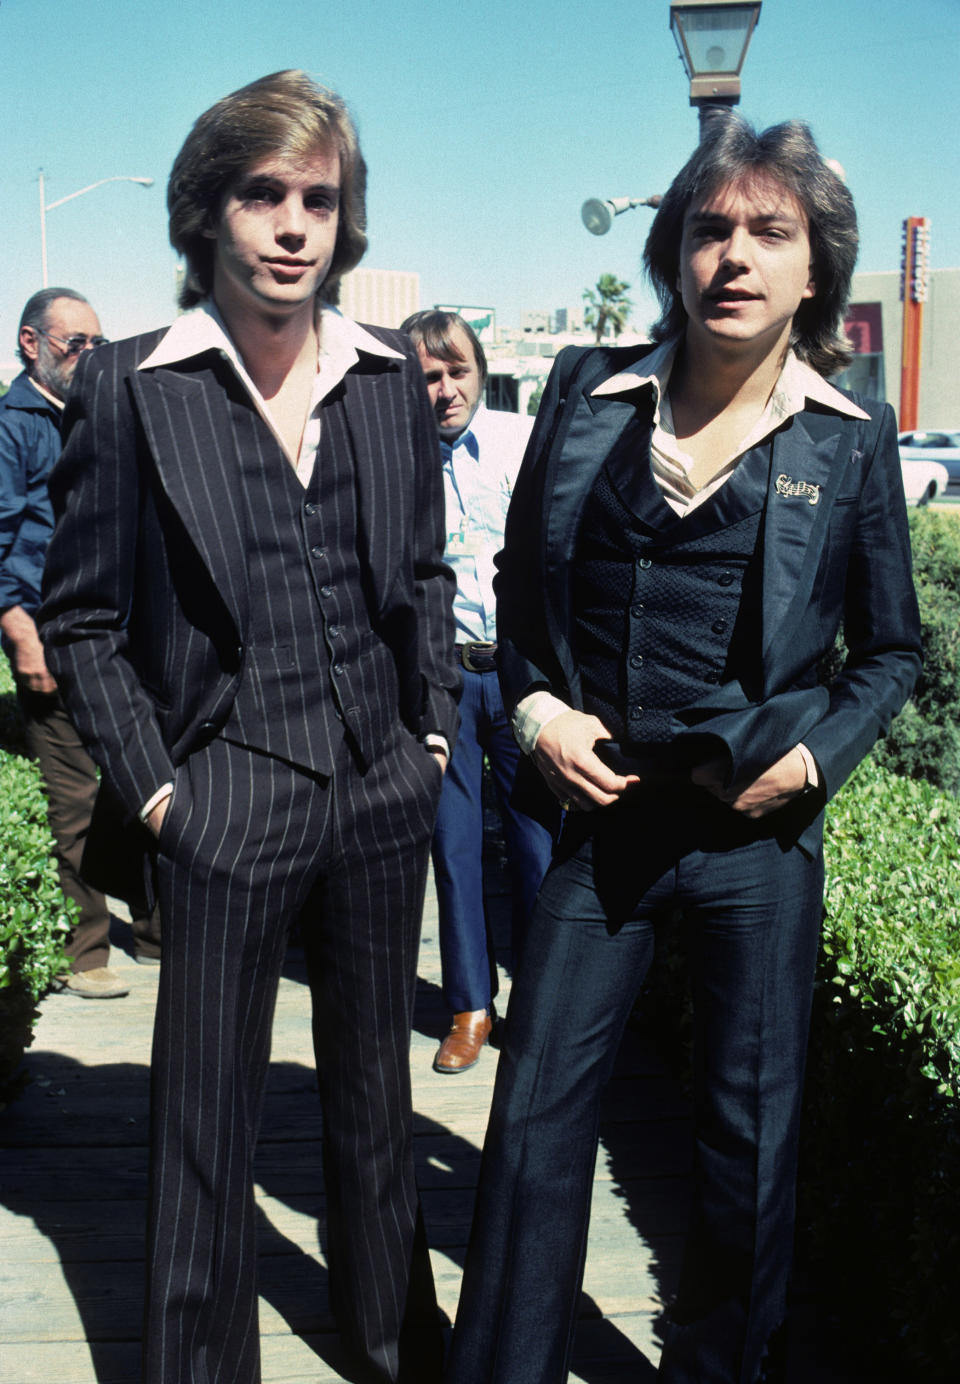 Shaun and David Cassidy in 1977. (Photo: Getty Images)